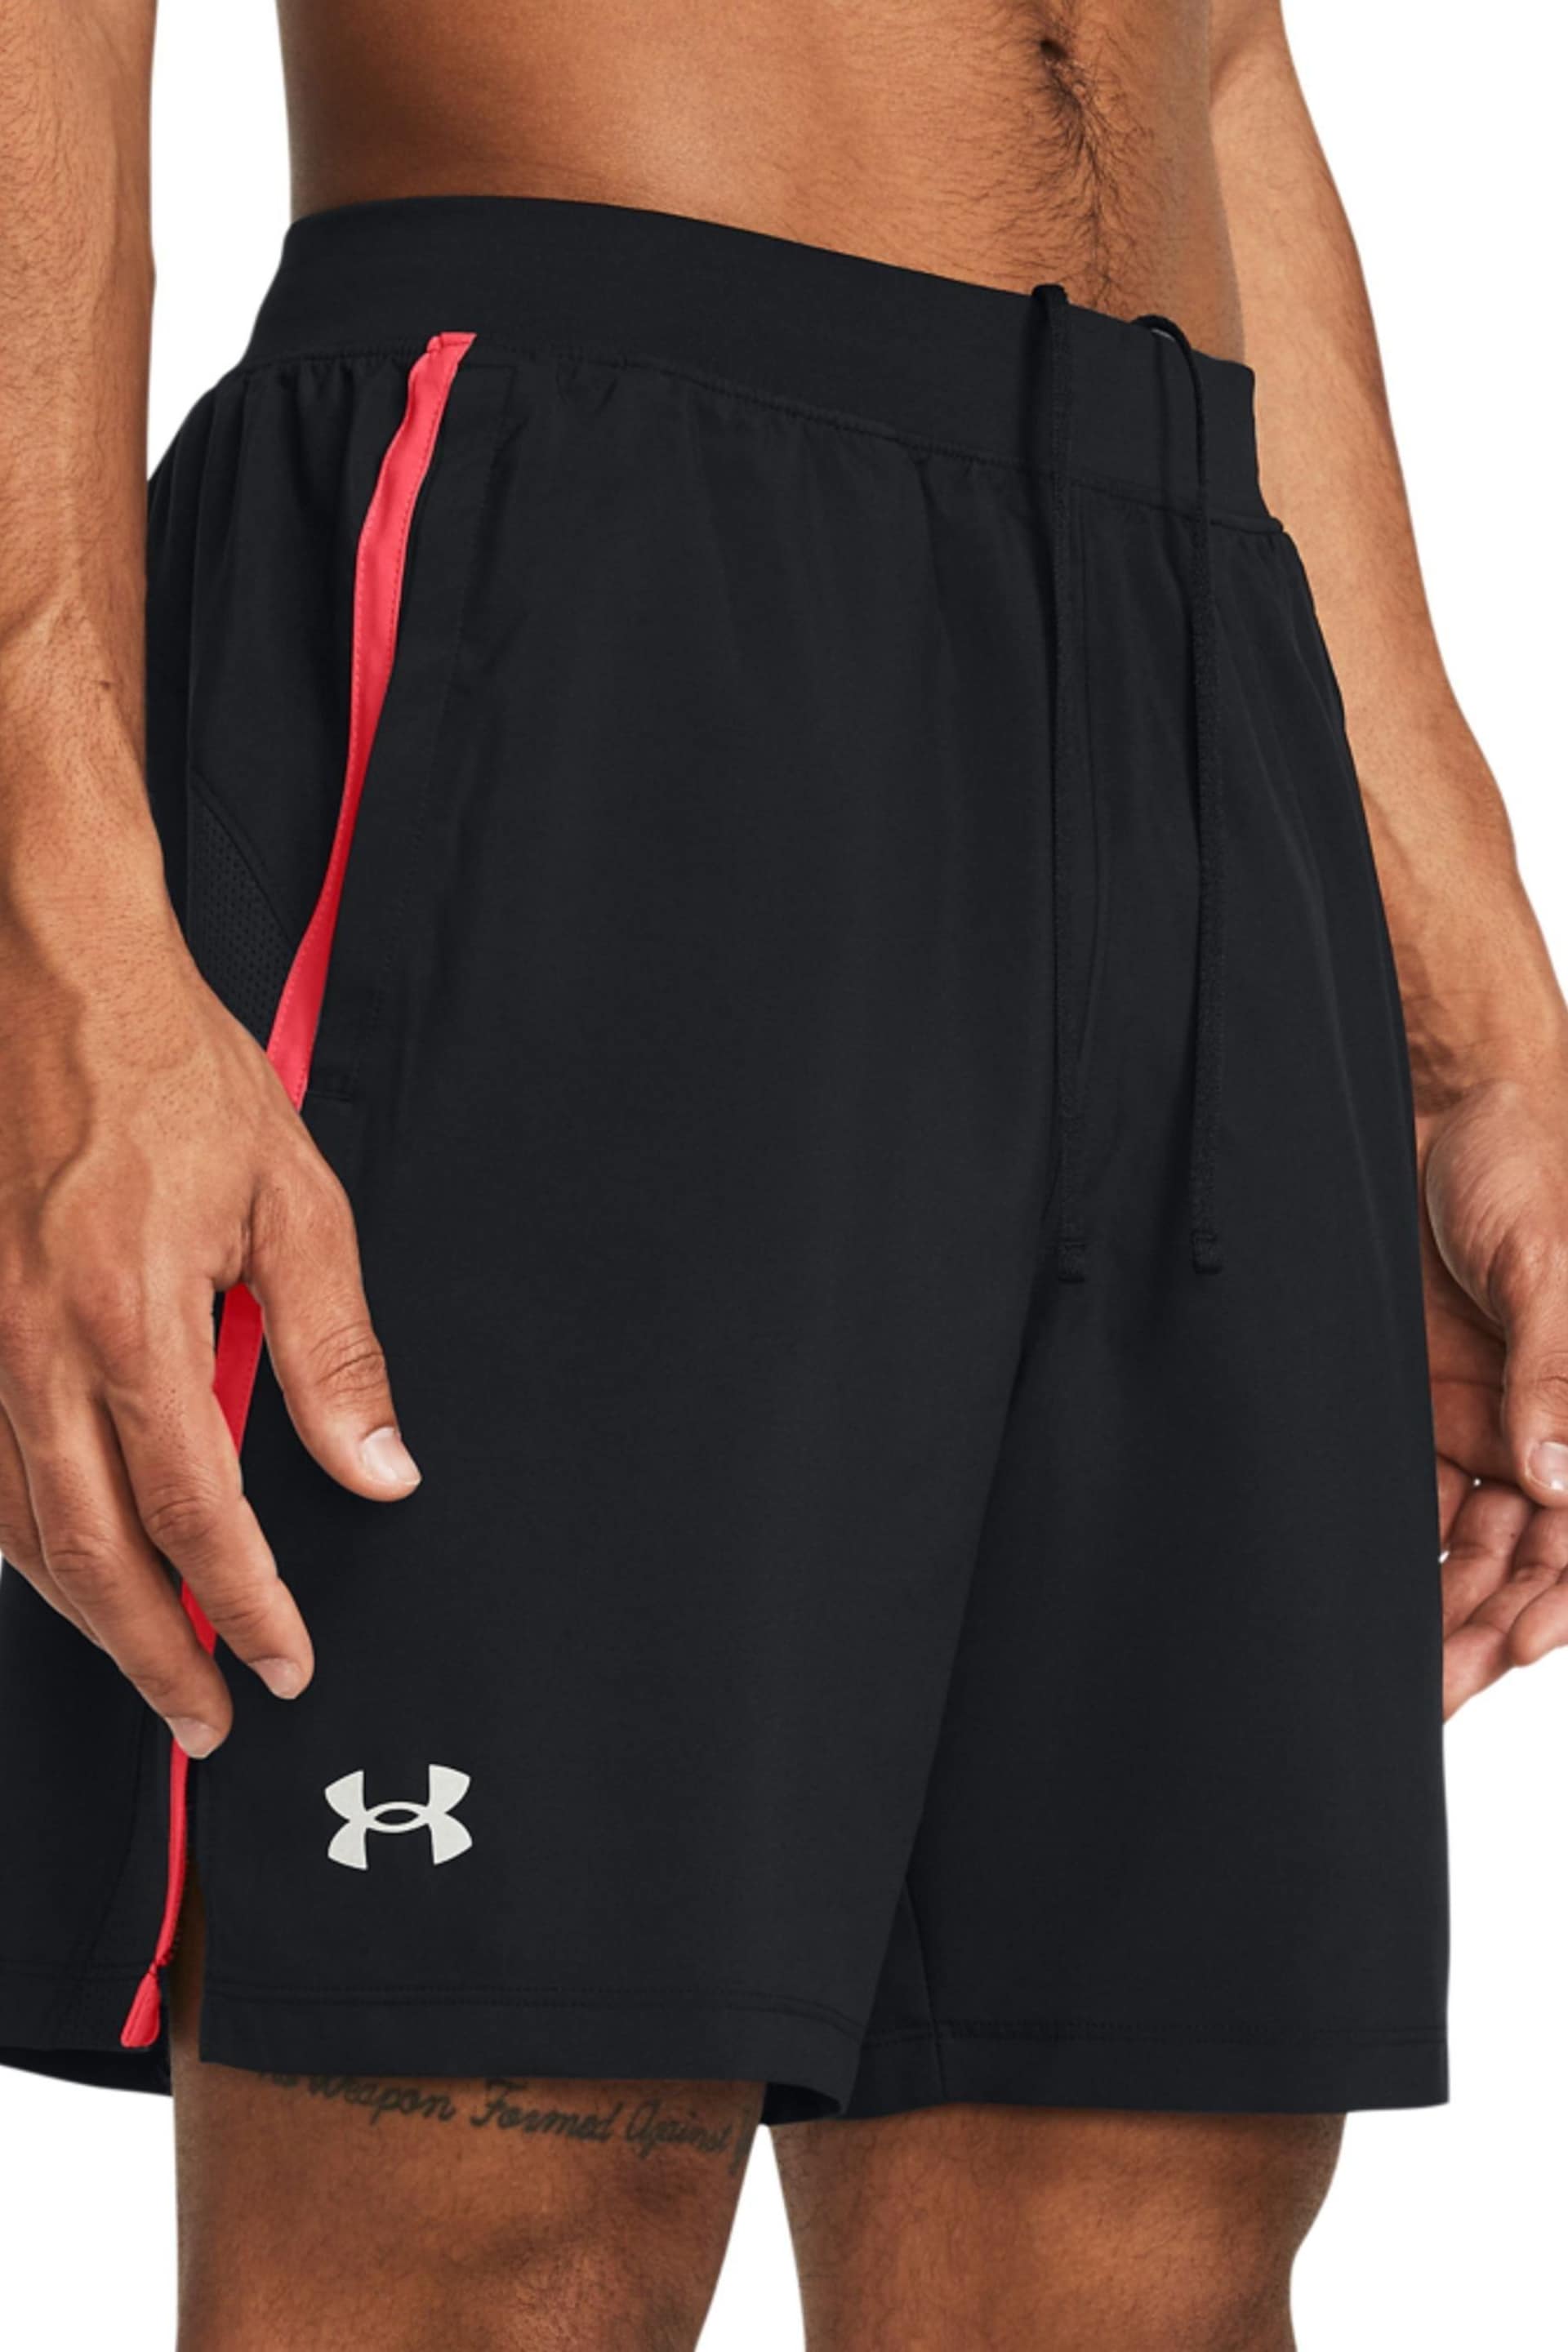 Under Armour Black/Red Launch 7" Shorts - Image 3 of 3